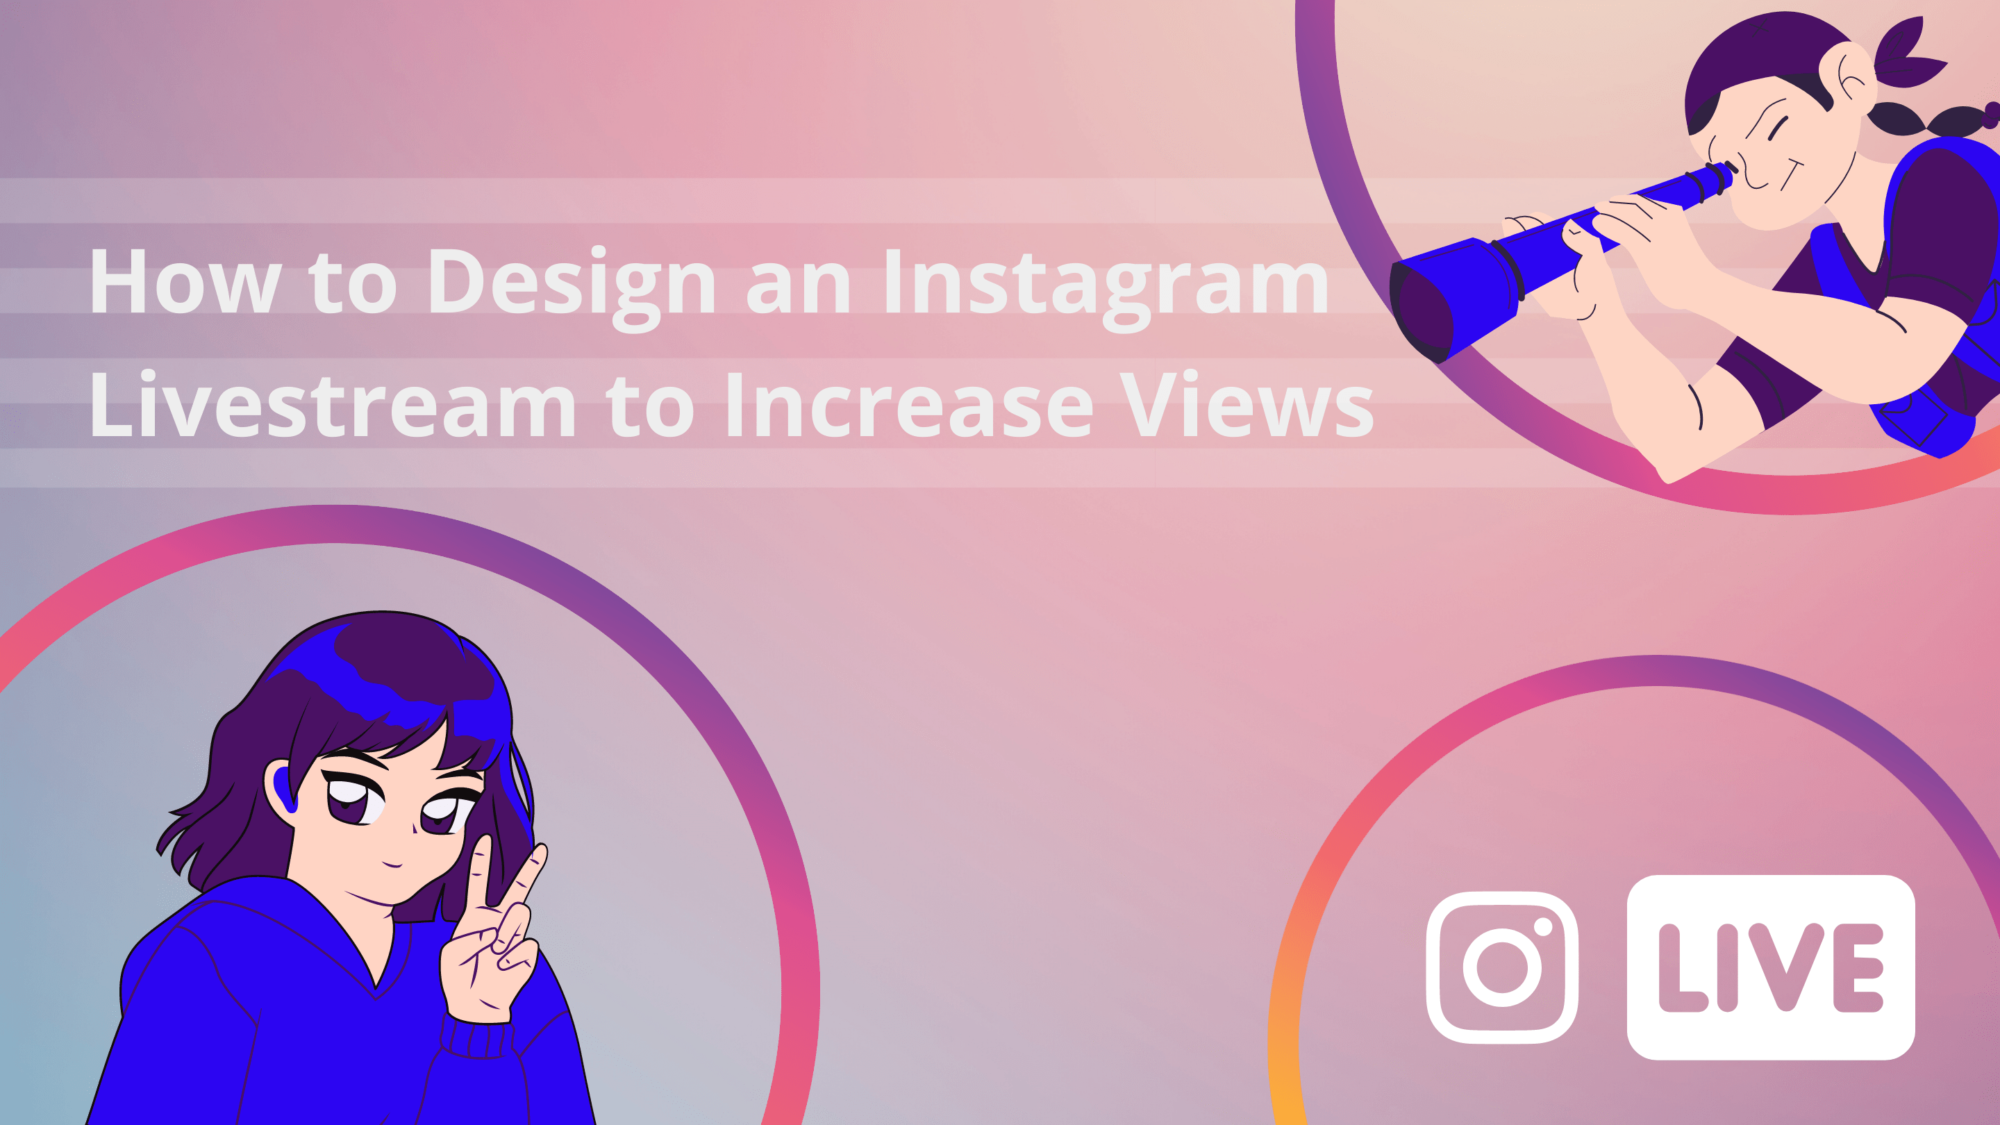 How-to-Design-an-Instagram-Livestream-to-Increase-Views.png